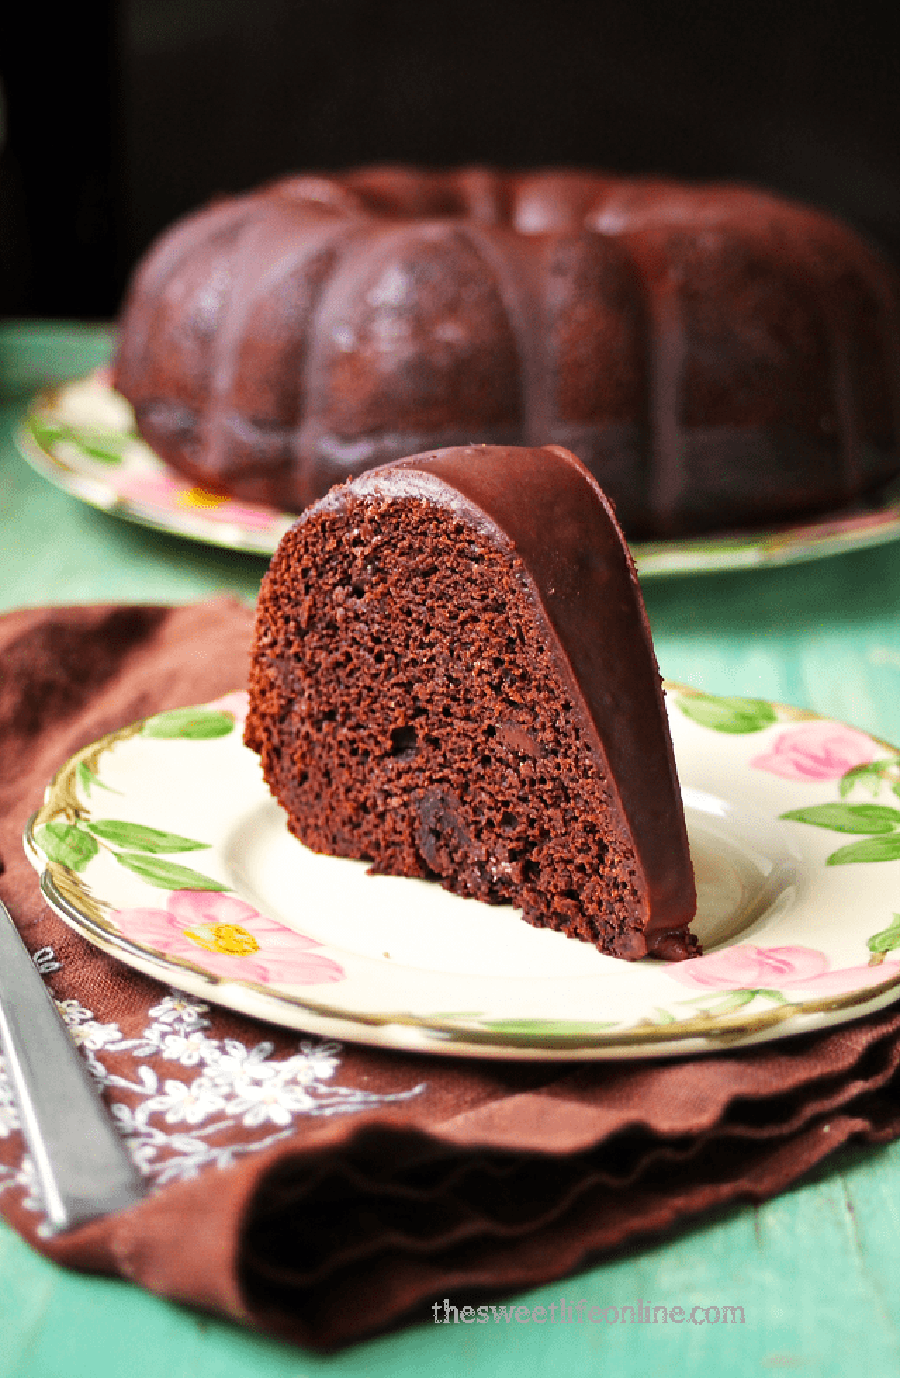 A slice of chocolate bundt cake sitting on a flowered plate with a cloth napkin under it and the rest of the cake in the background.